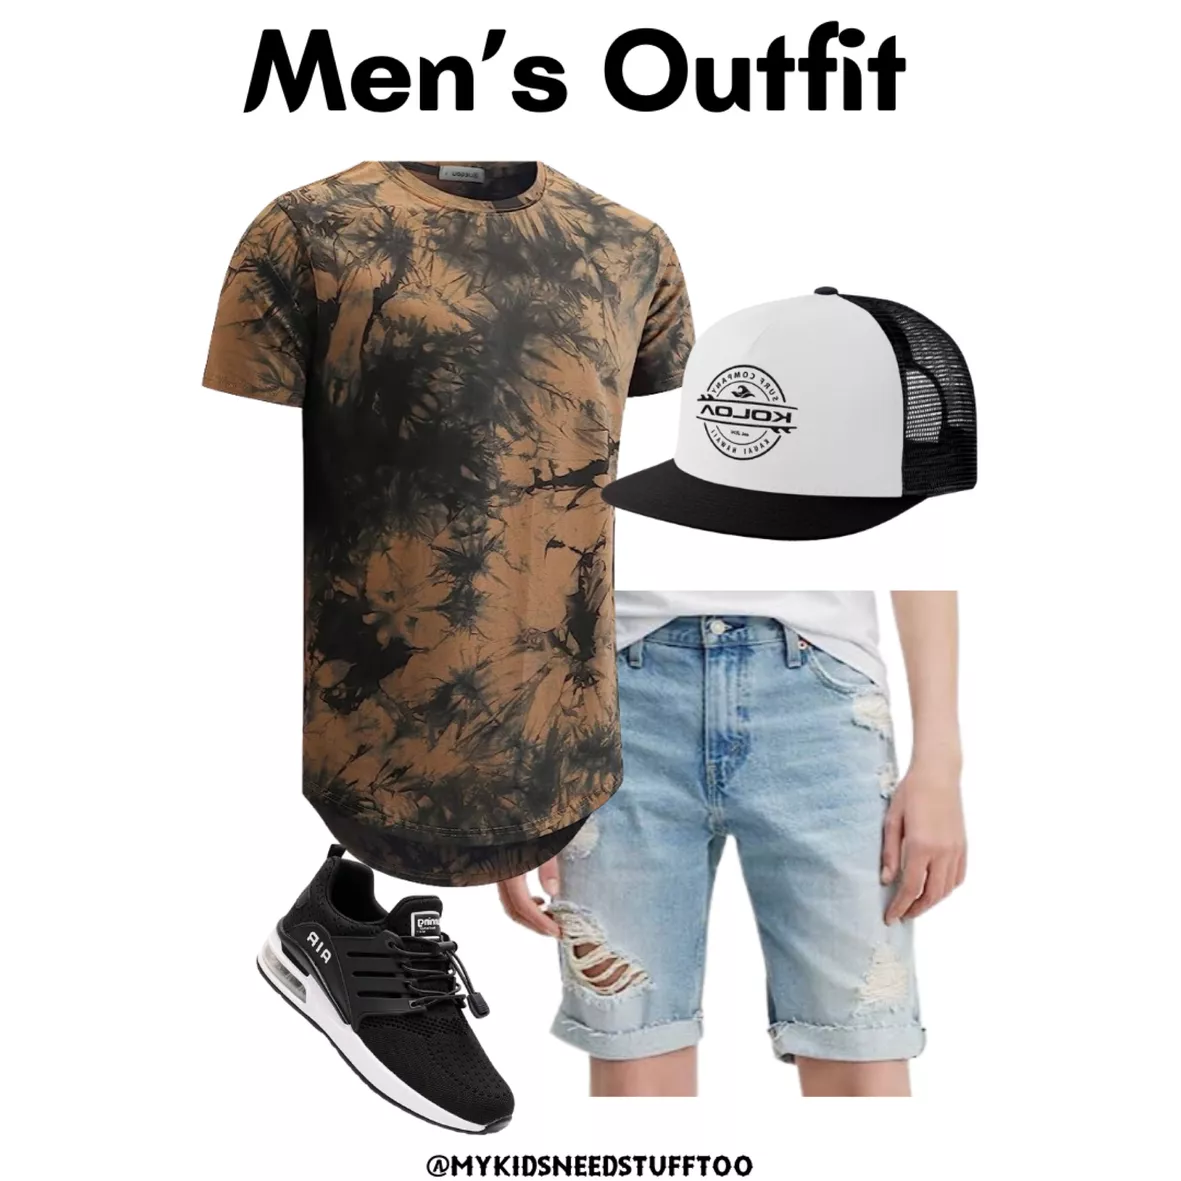 Baseball shirt  Baseball style shirt, Baseball shirt outfit, Streetwear  men outfits